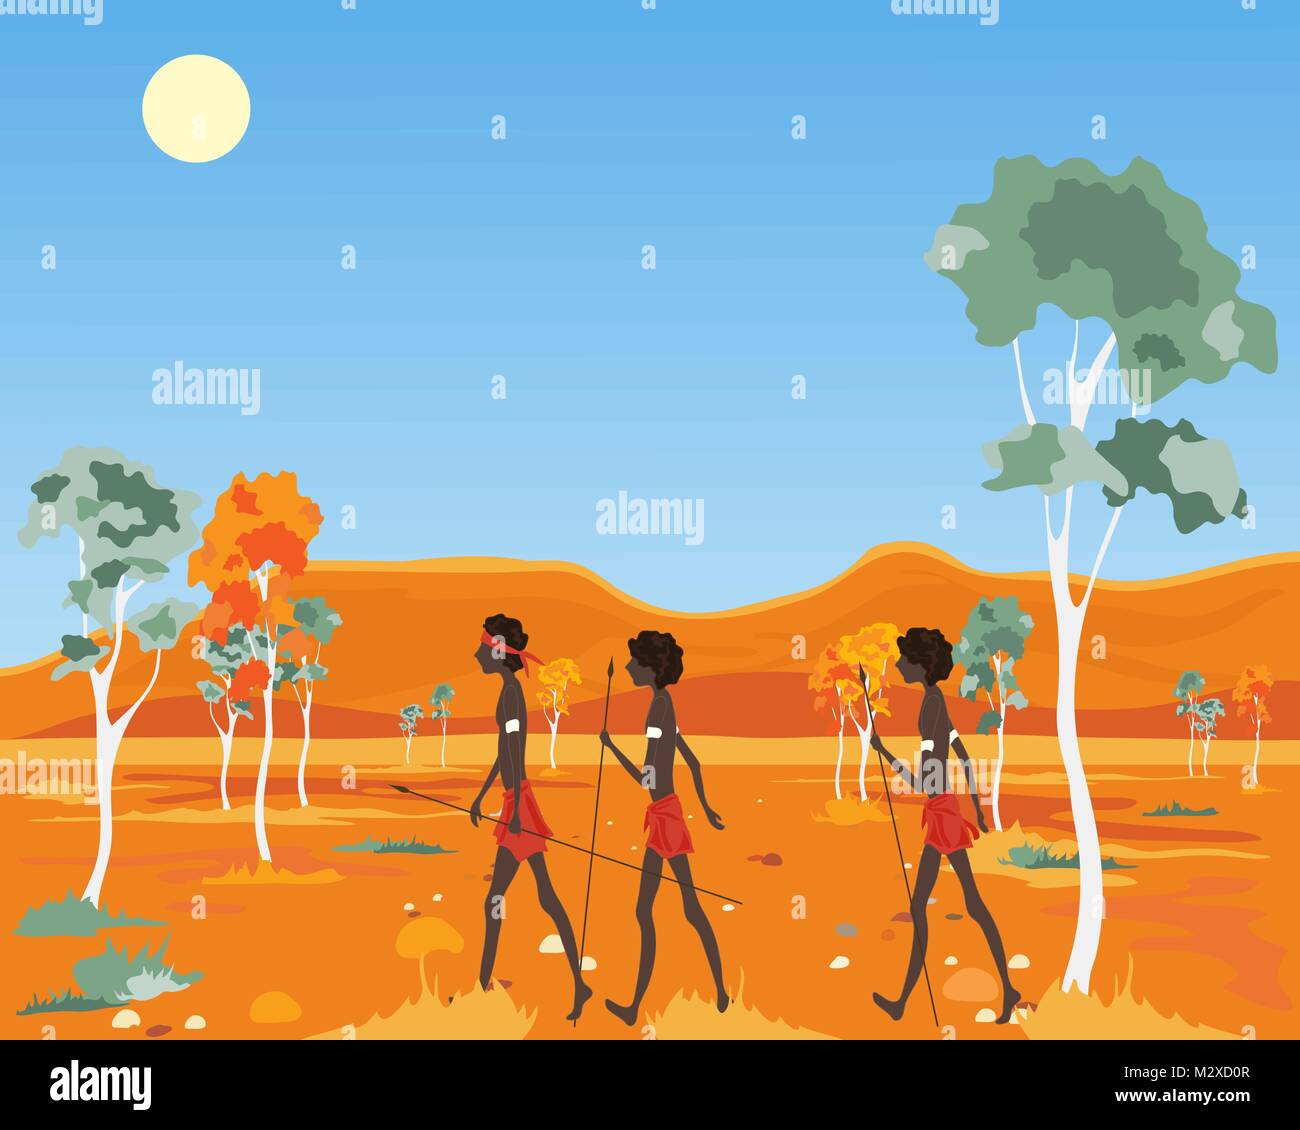 an illustration of native australian people walking across the outback in hot weather with eucalyptus trees rocks and mountains Stock Vector